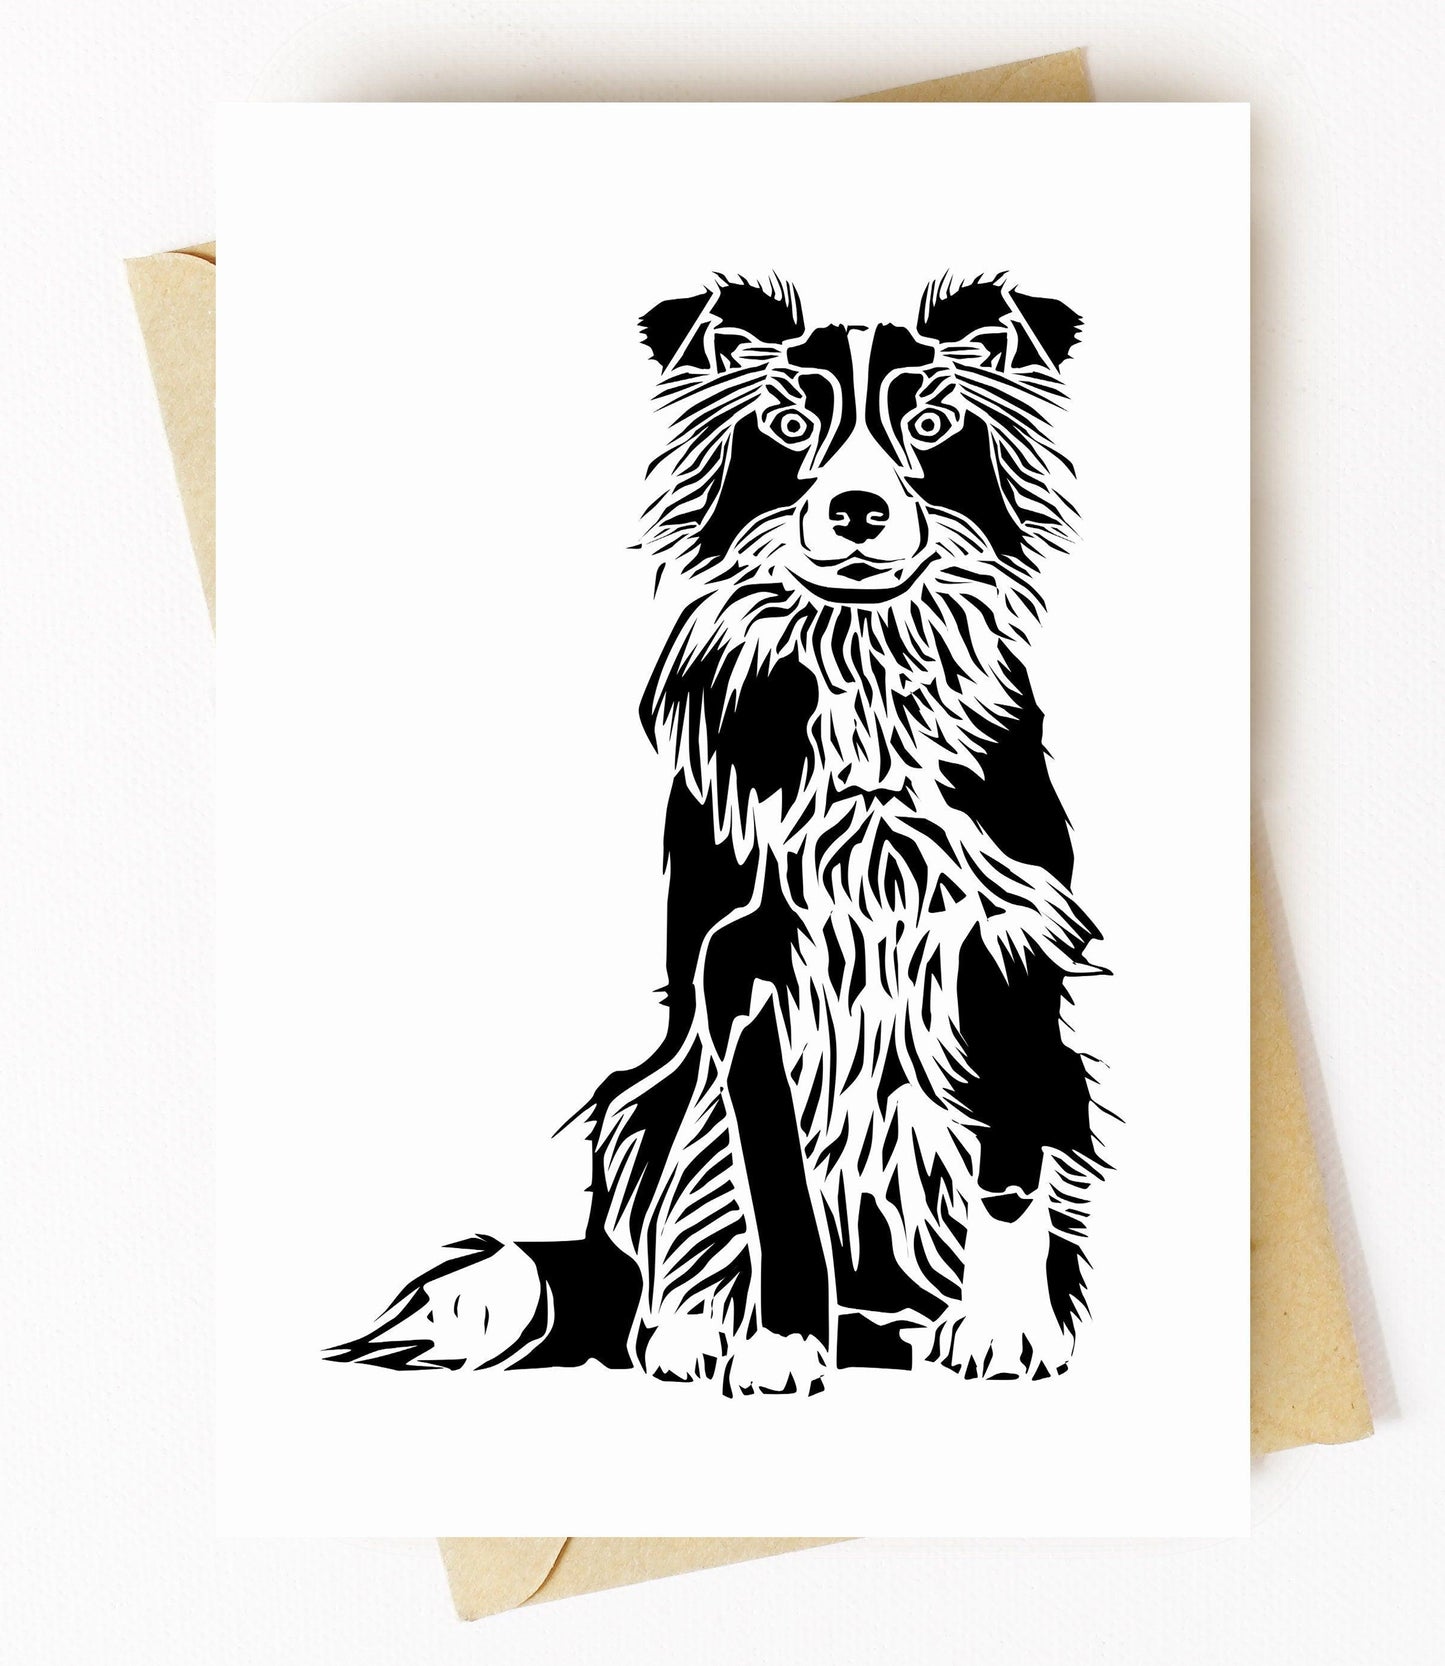 BellavanceInk: Greeting Card With Graphic Drawing of A Border Collie 5 x 7 Inches - BellavanceInk